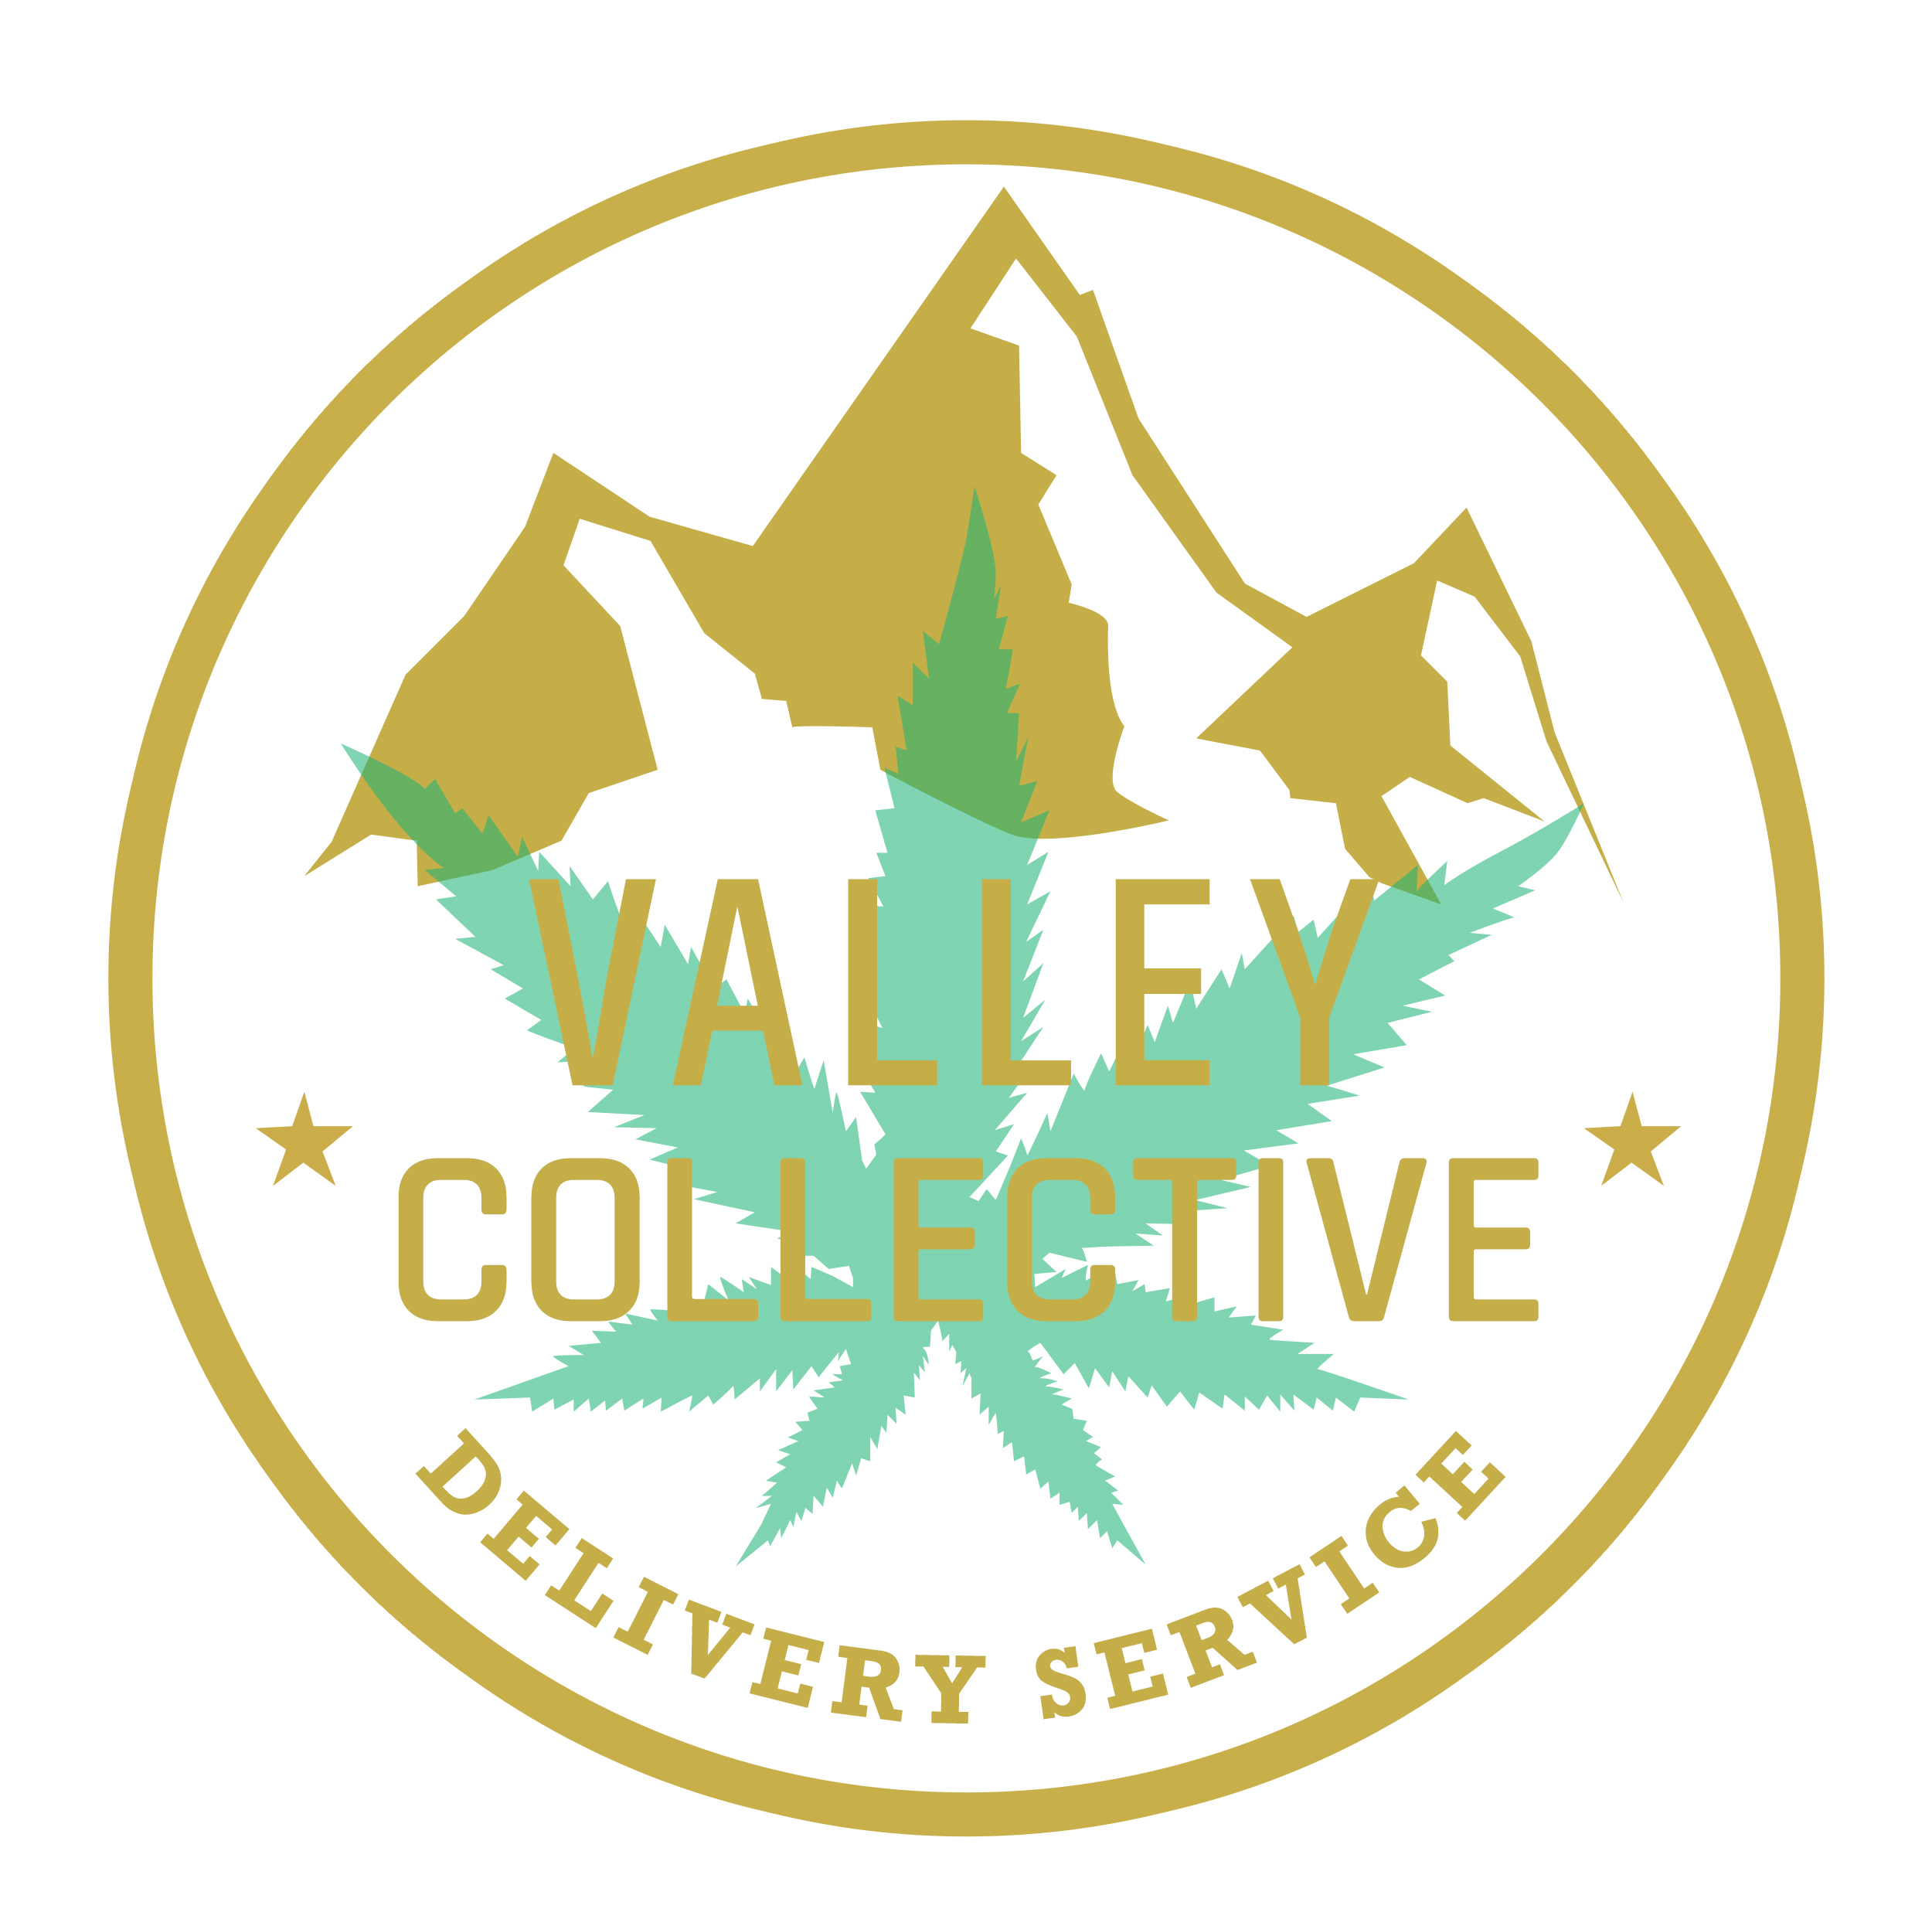 Valley Collective